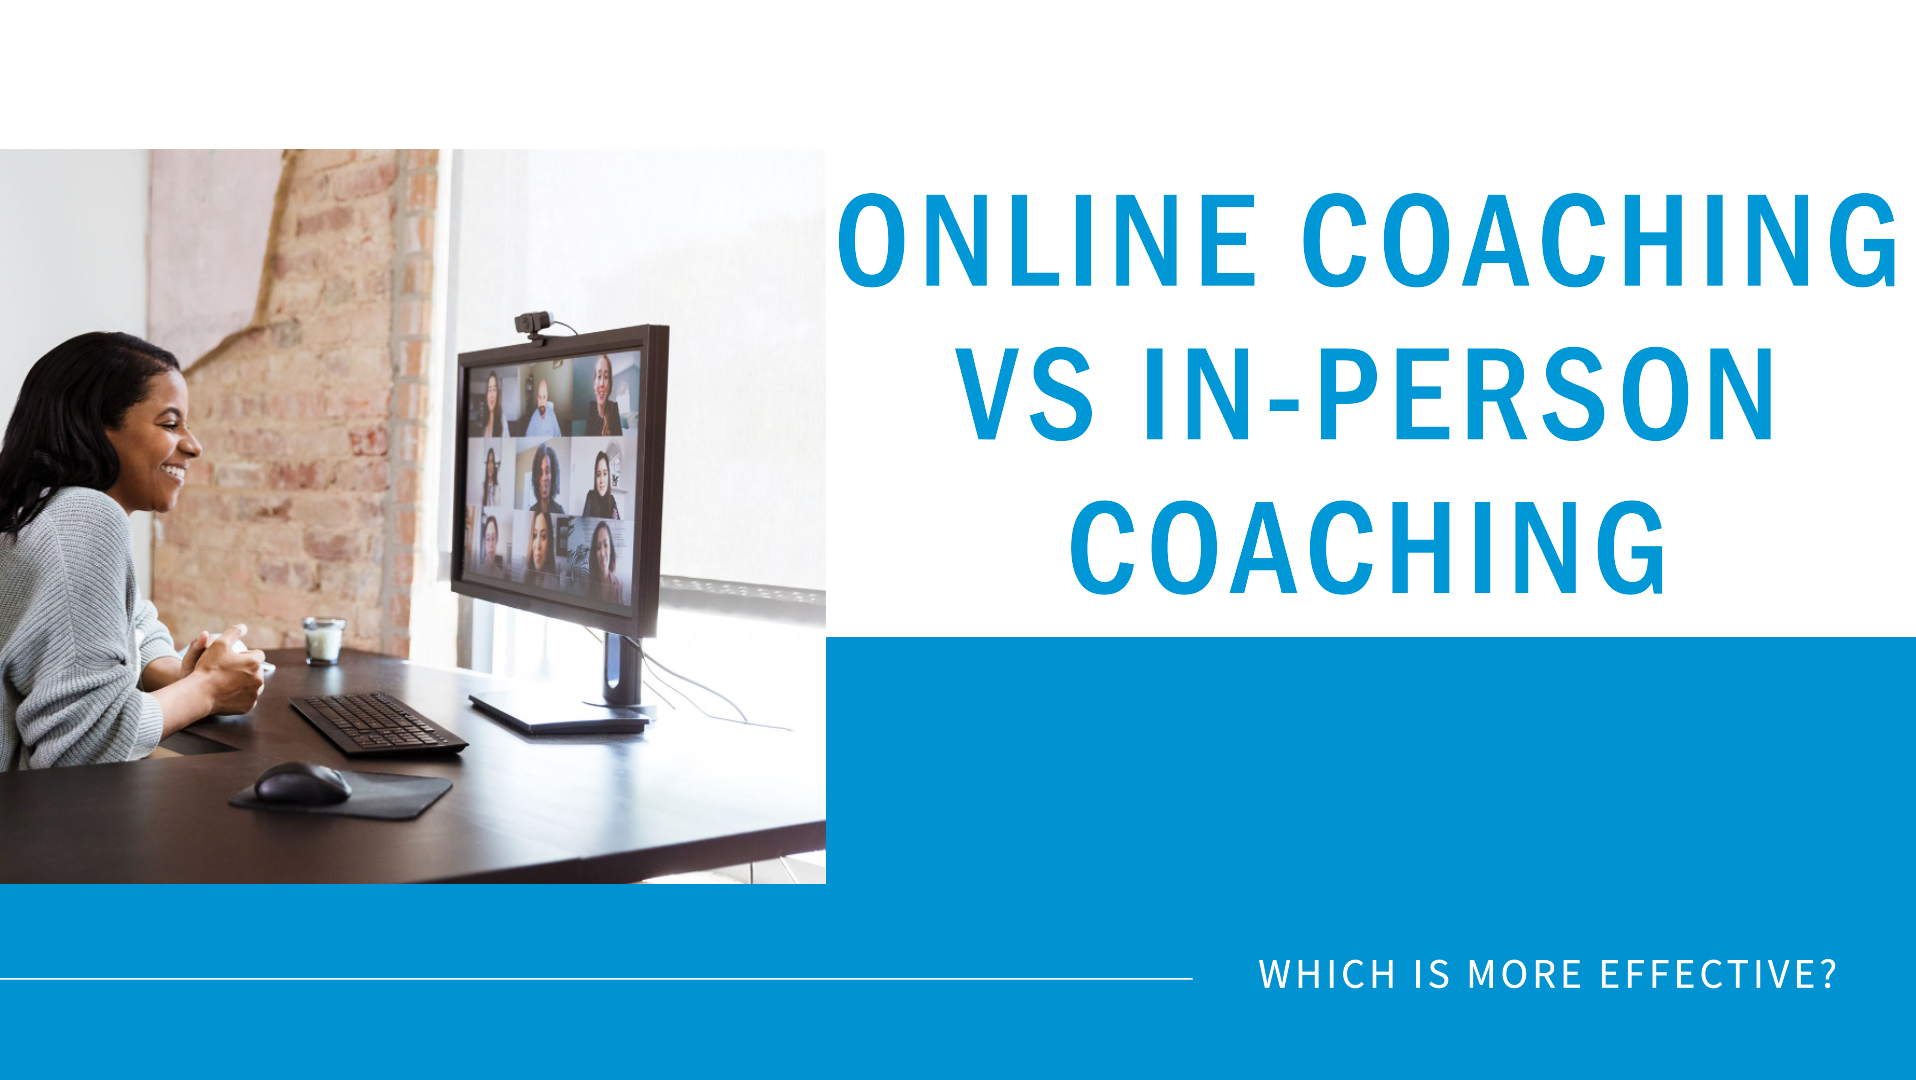 Can Online Coaching Match the Effectiveness of In-Person Coaching?